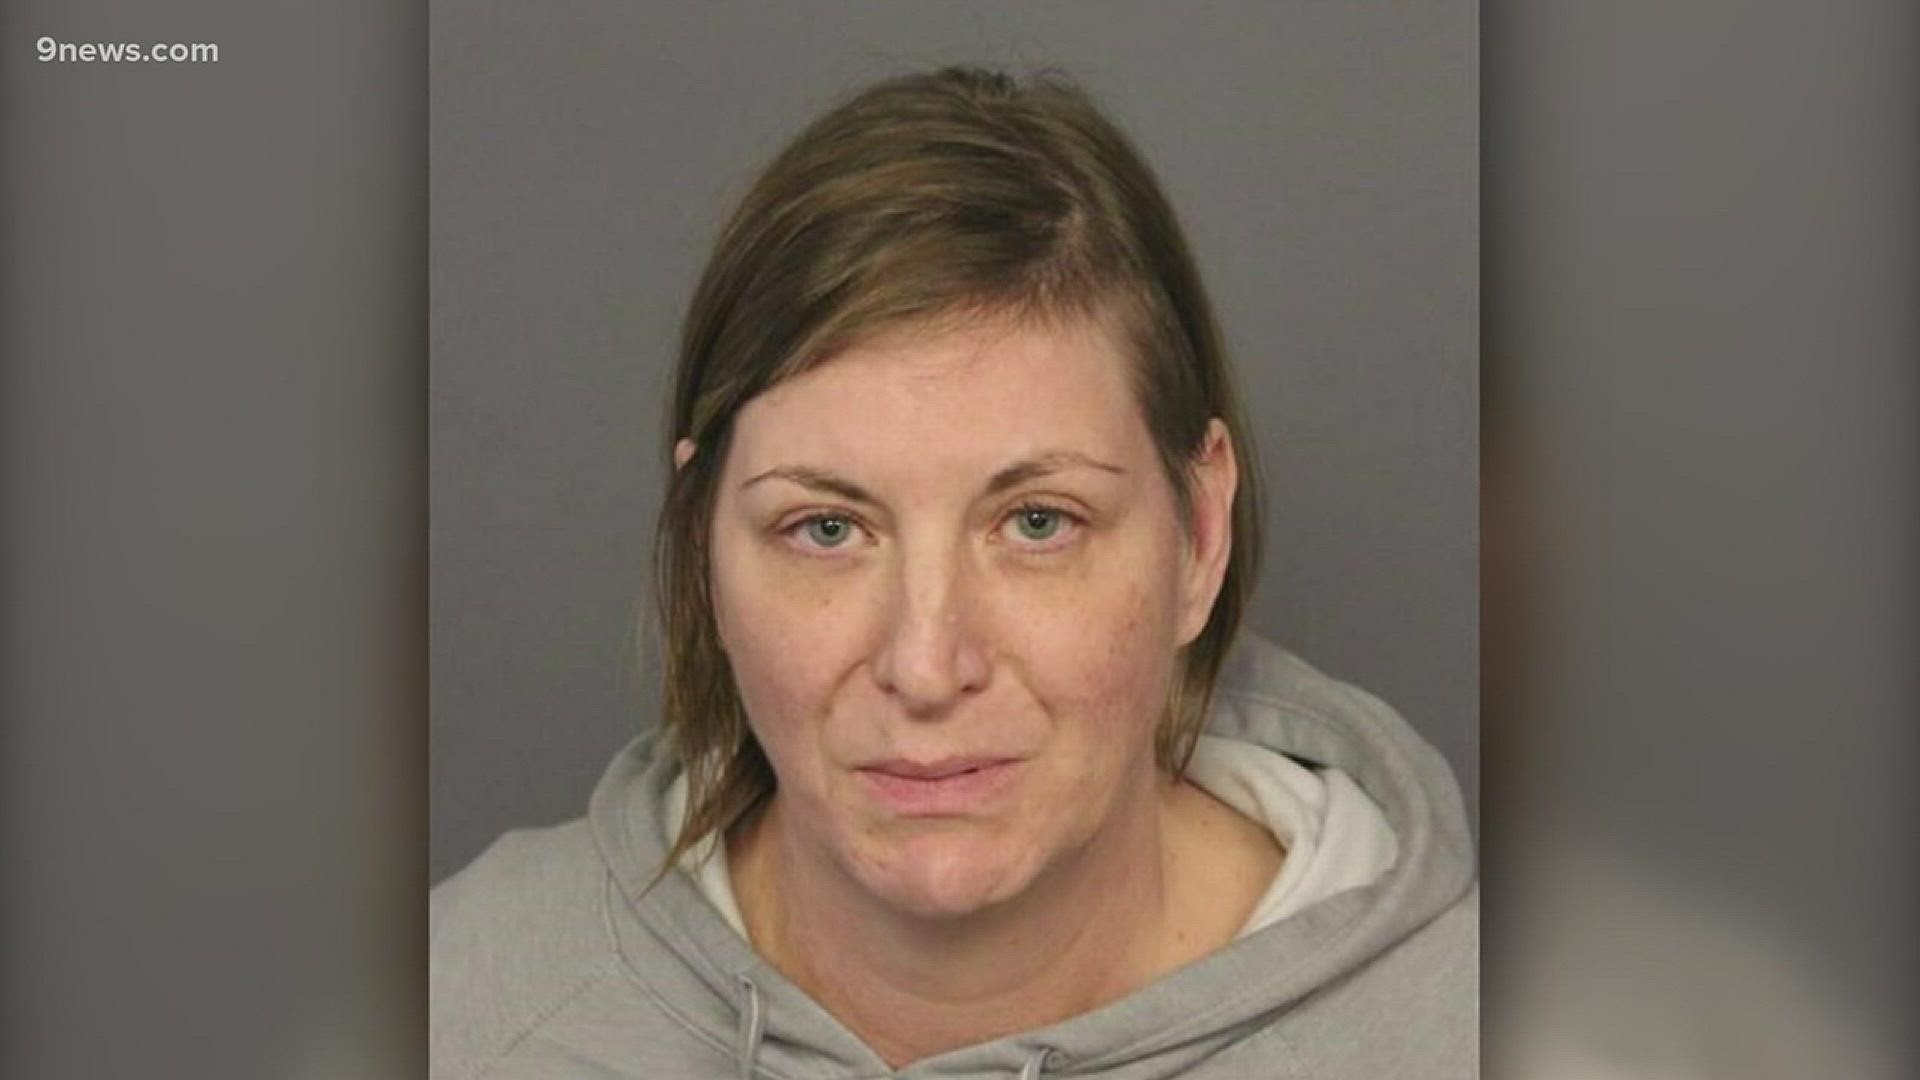 Elisha Pankey is charged with abuse of a corpse after police say her son's body was found in a Denver storage unit.